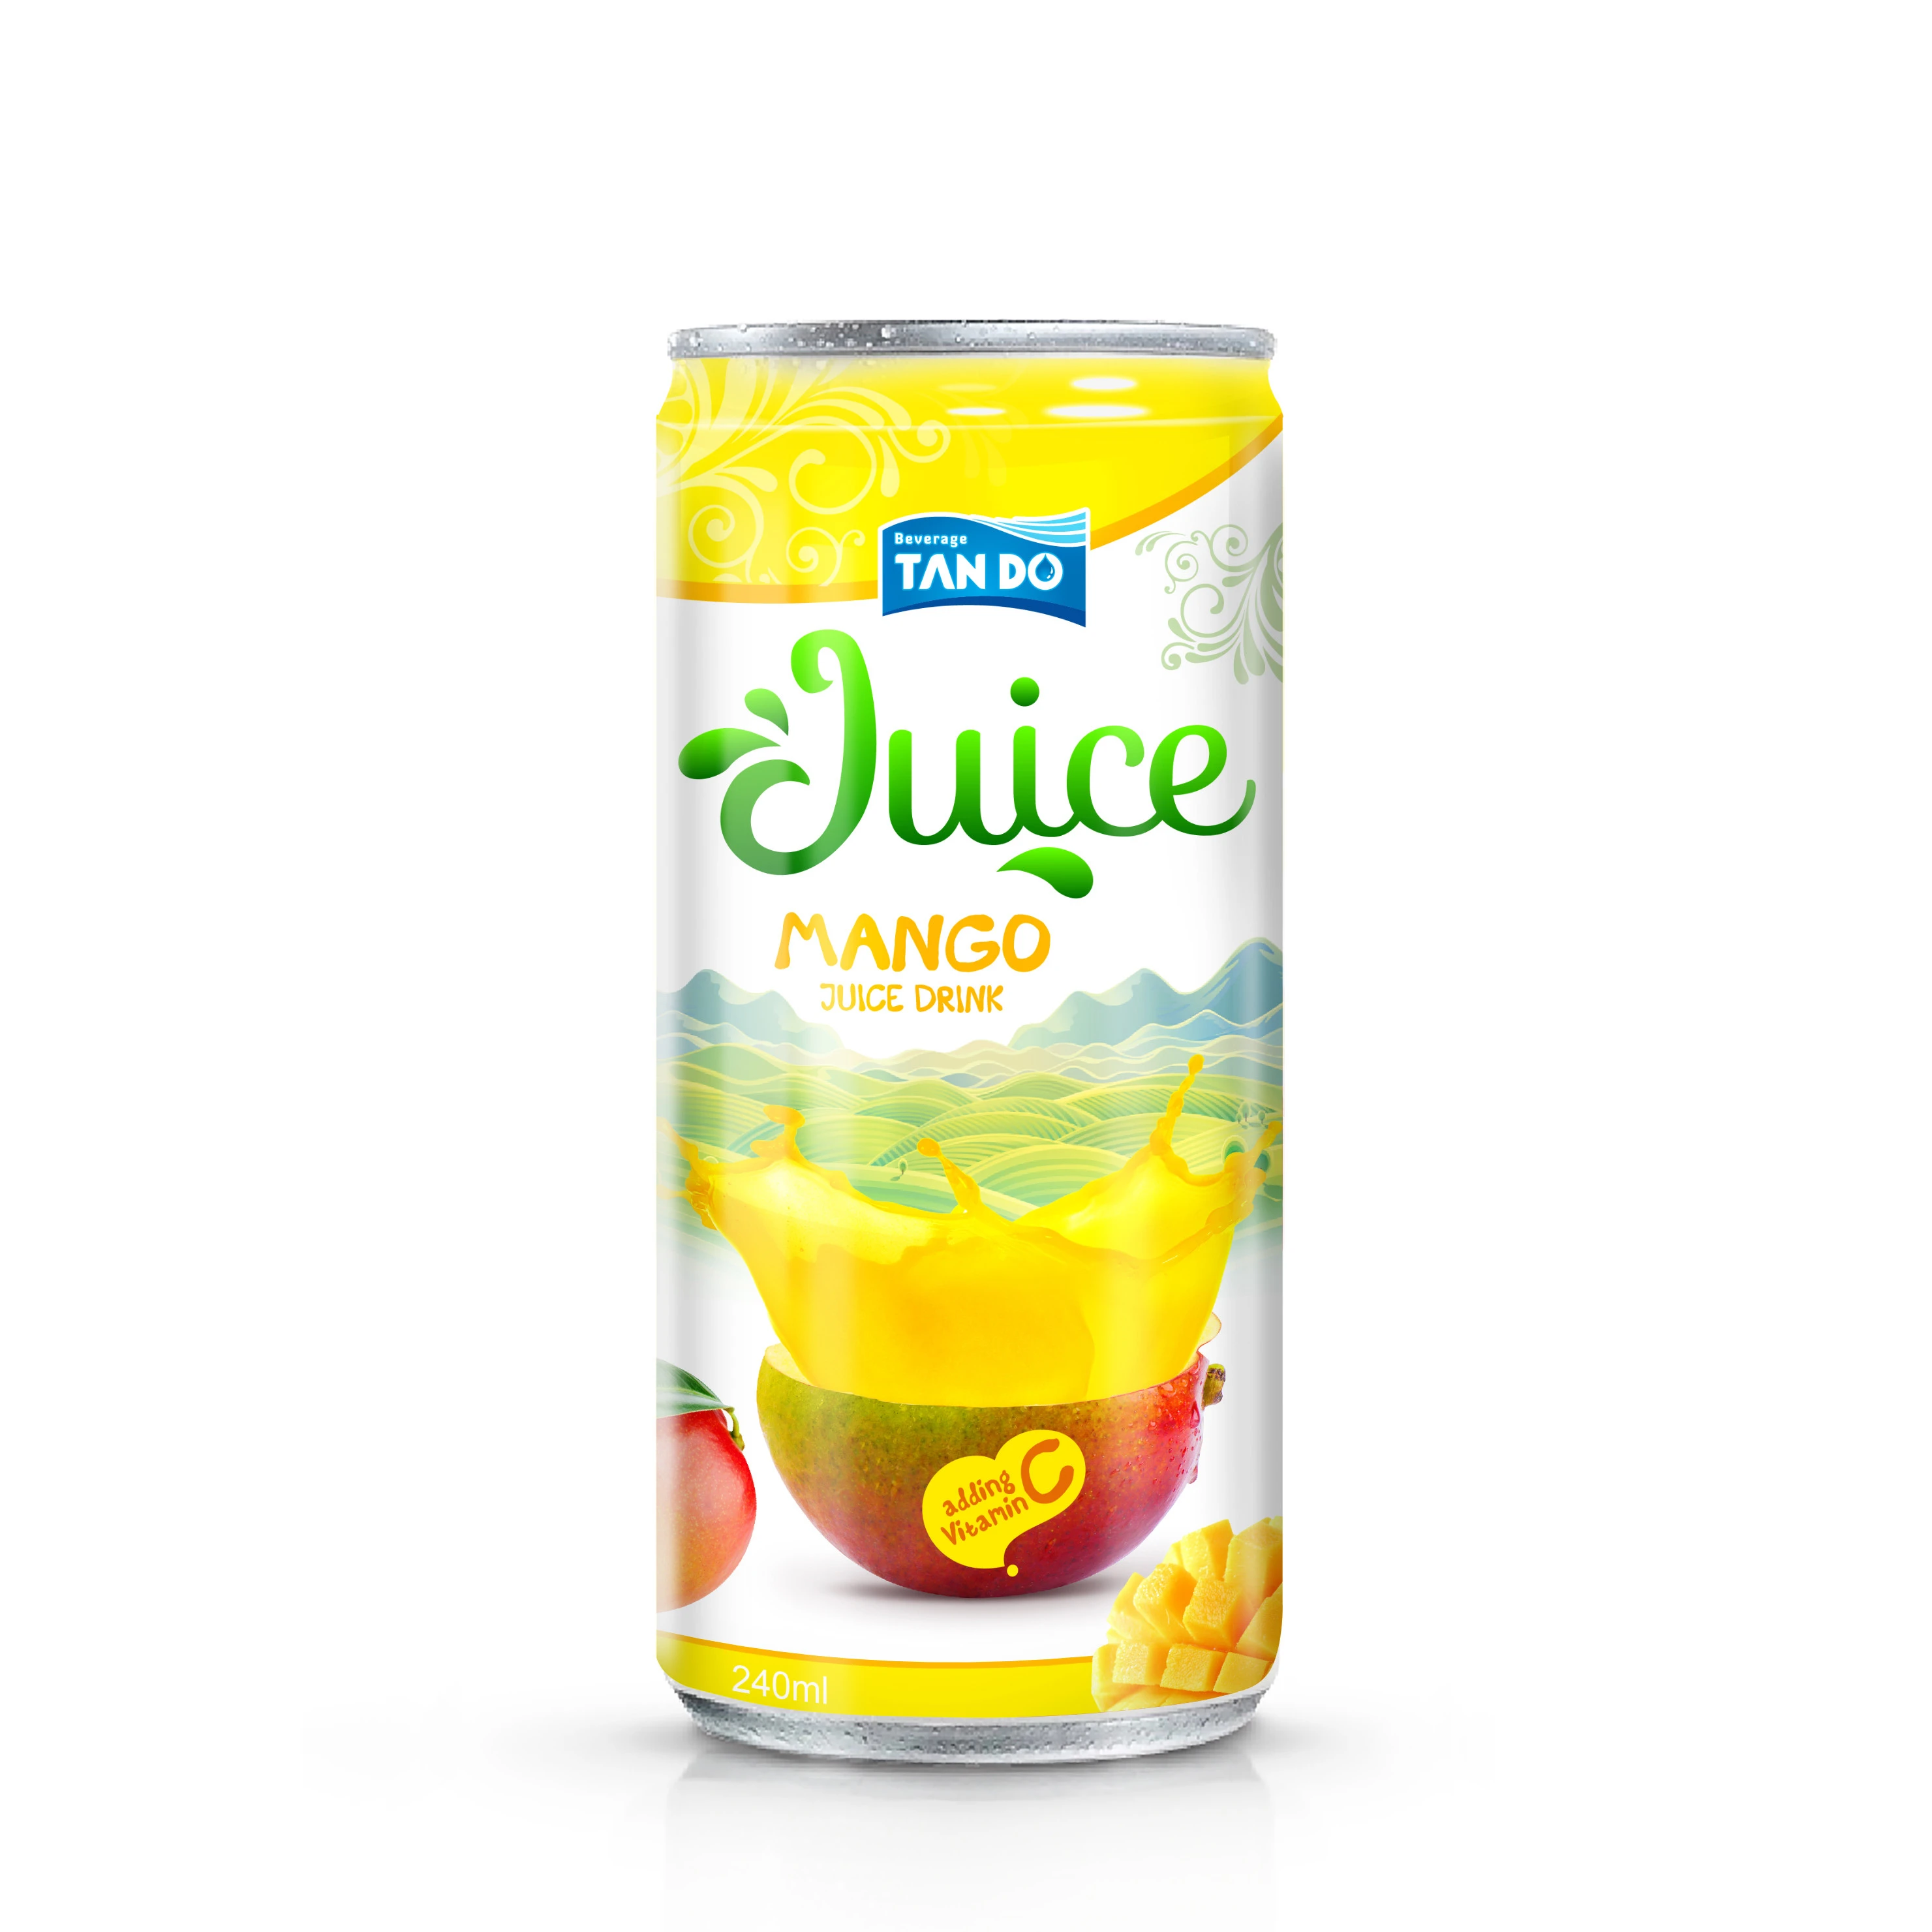 Juice factory Private label for Canned juices 330ml orange mango guava pineapple soursop